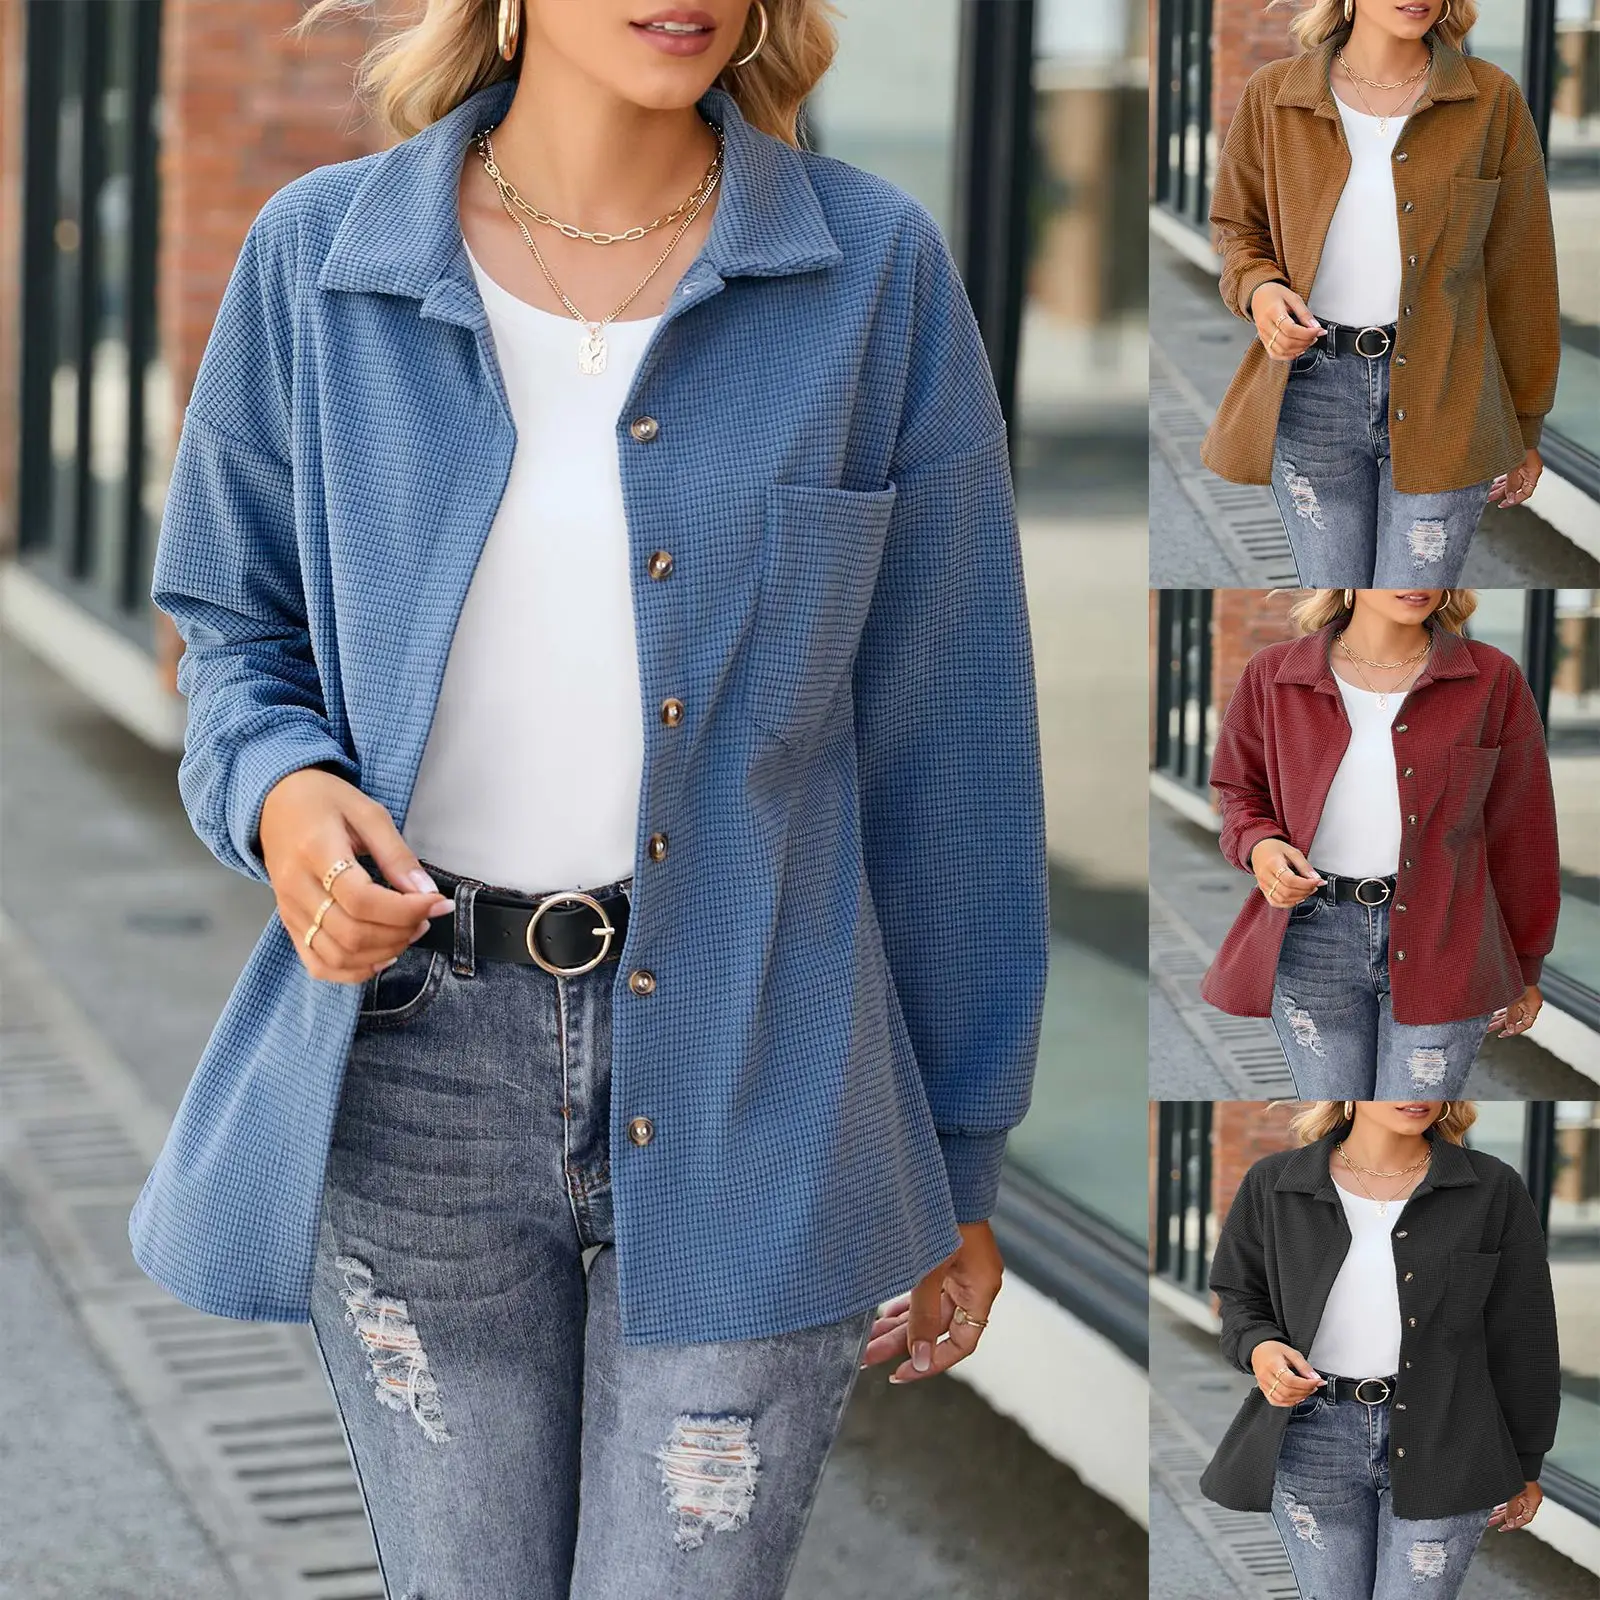 2023 New Women's Autumn and Winter Solid Color Jackets for Women Loose Fashion Button Long Sleeve Cardigan Jacket Top